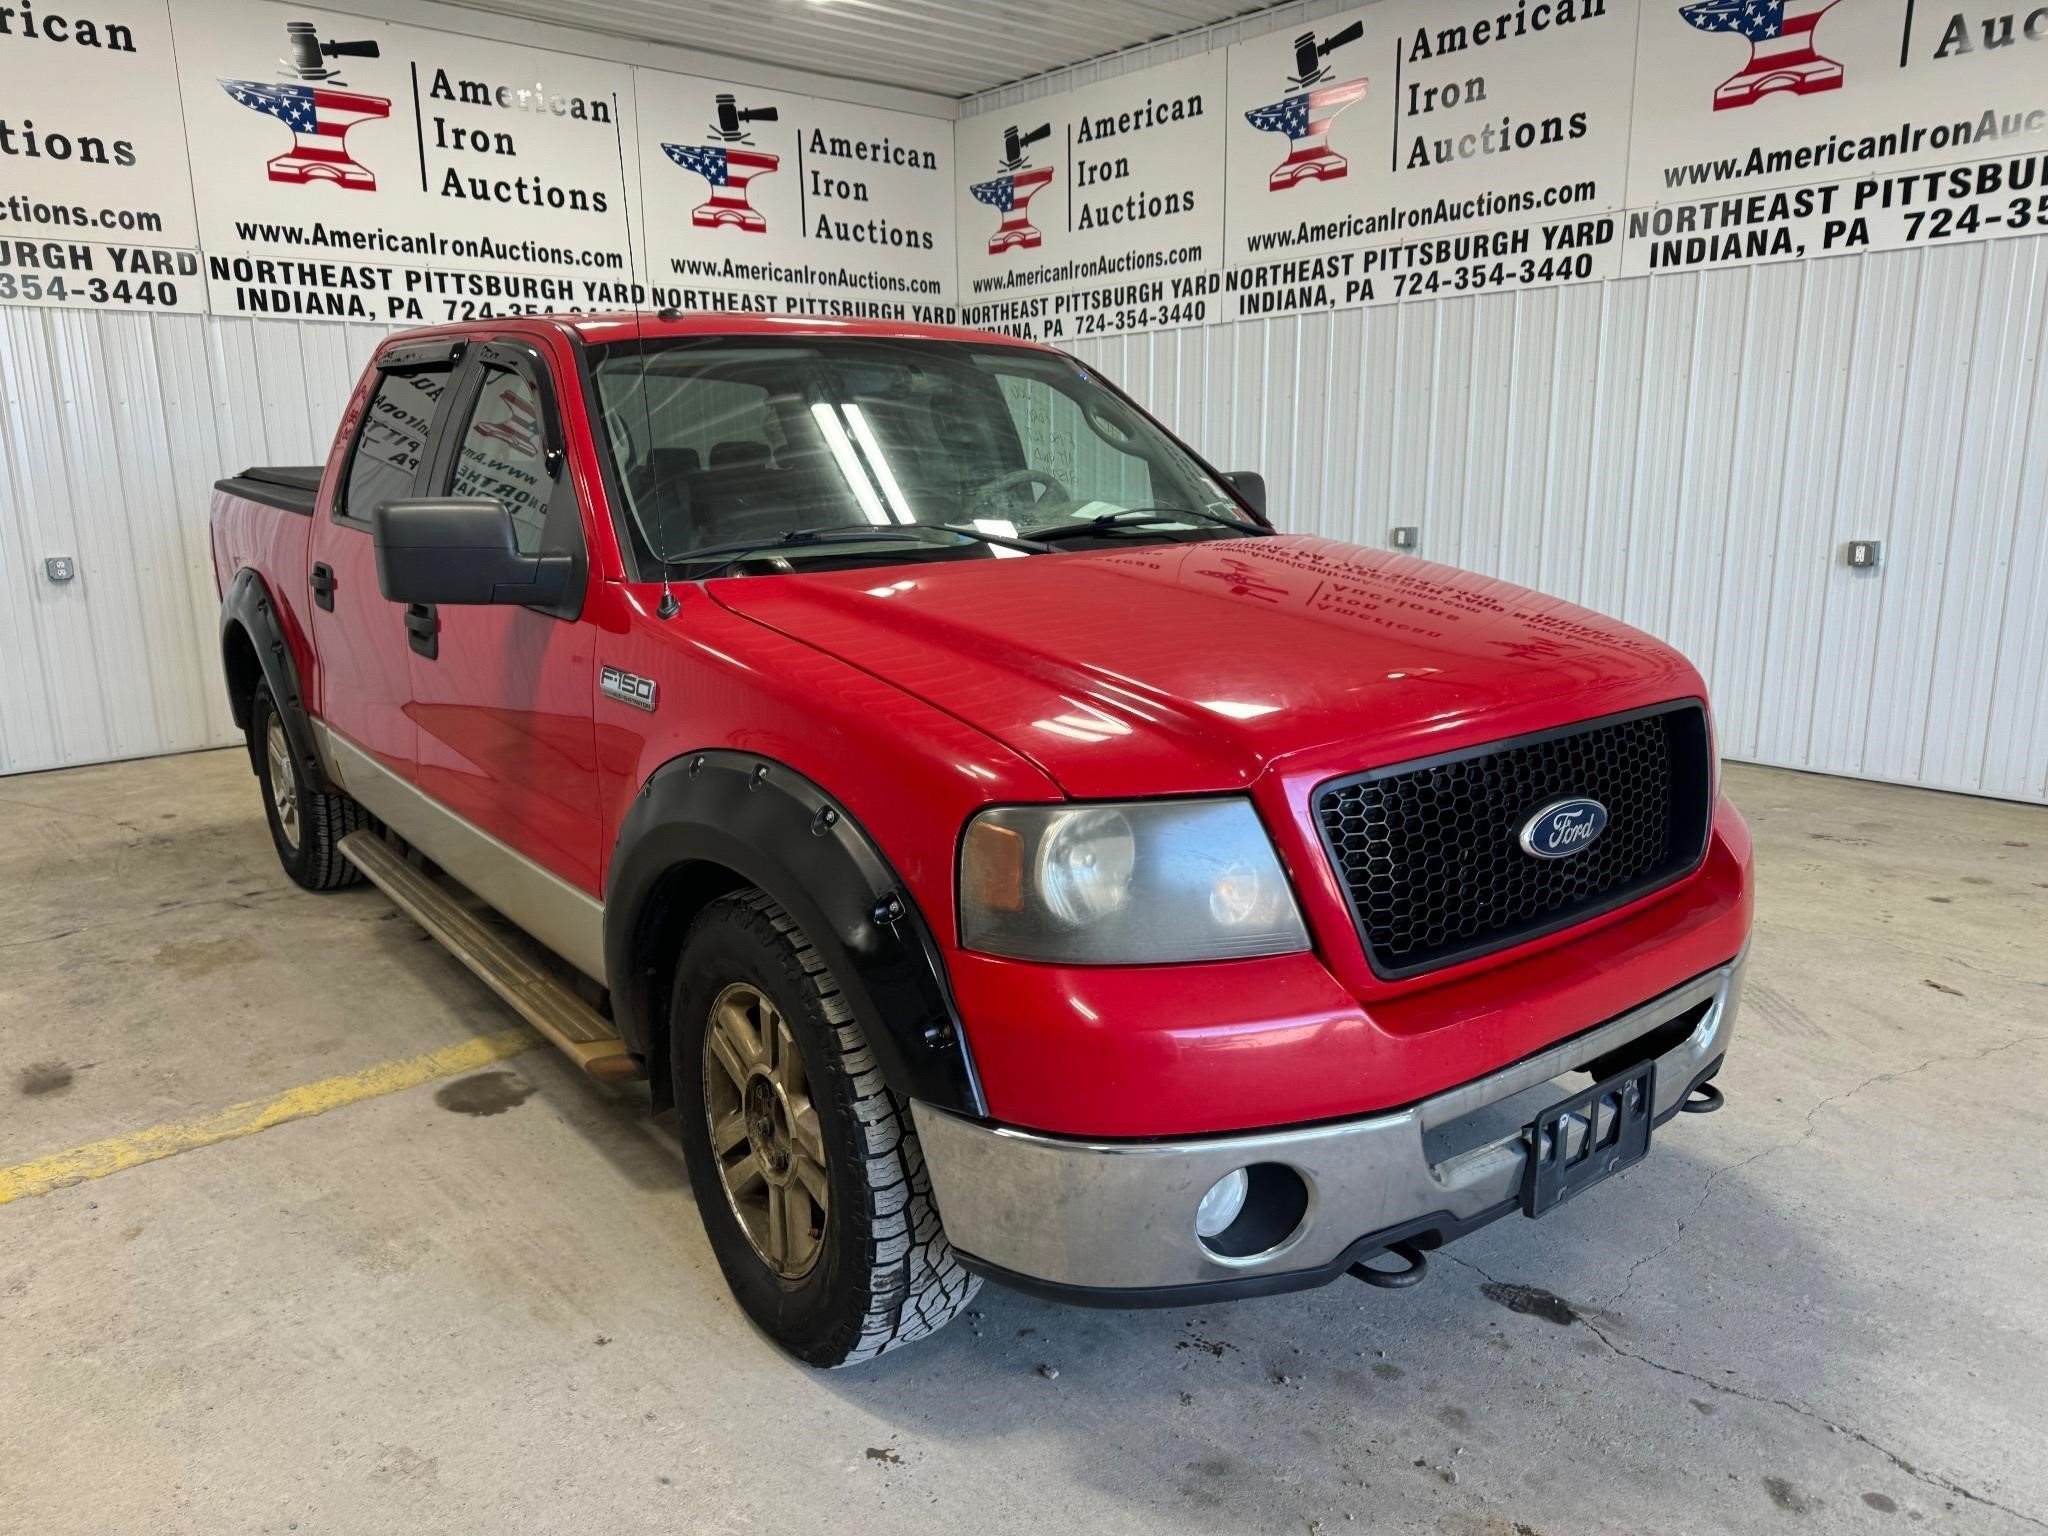 2006 Ford F 150 XLT Truck- Titled -NO RESERVE